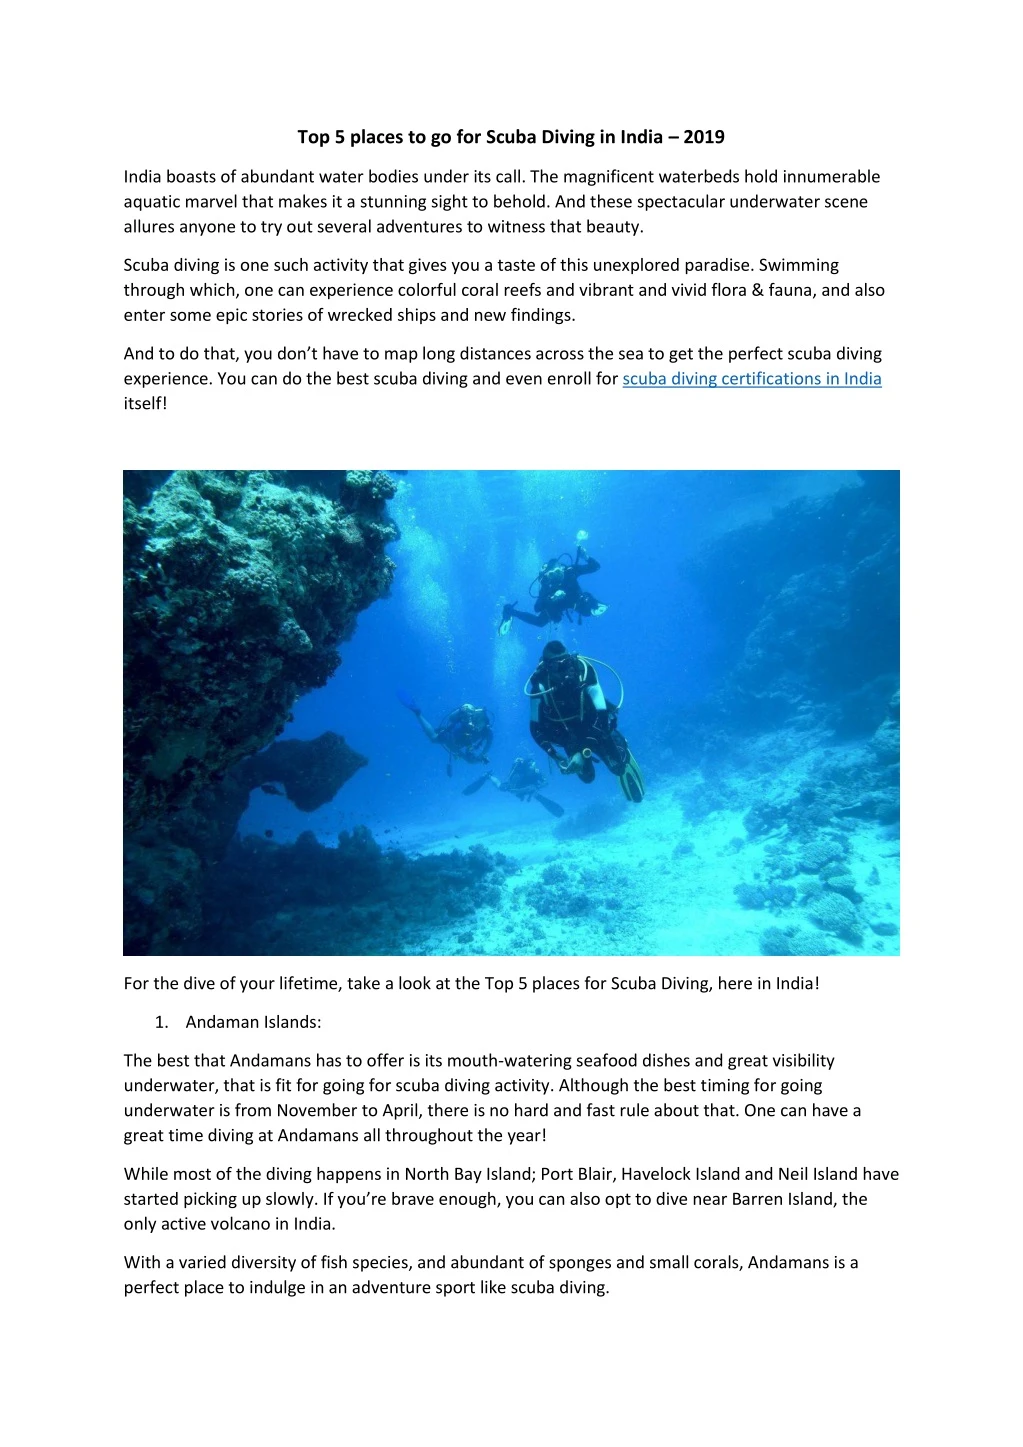 top 5 places to go for scuba diving in india 2019